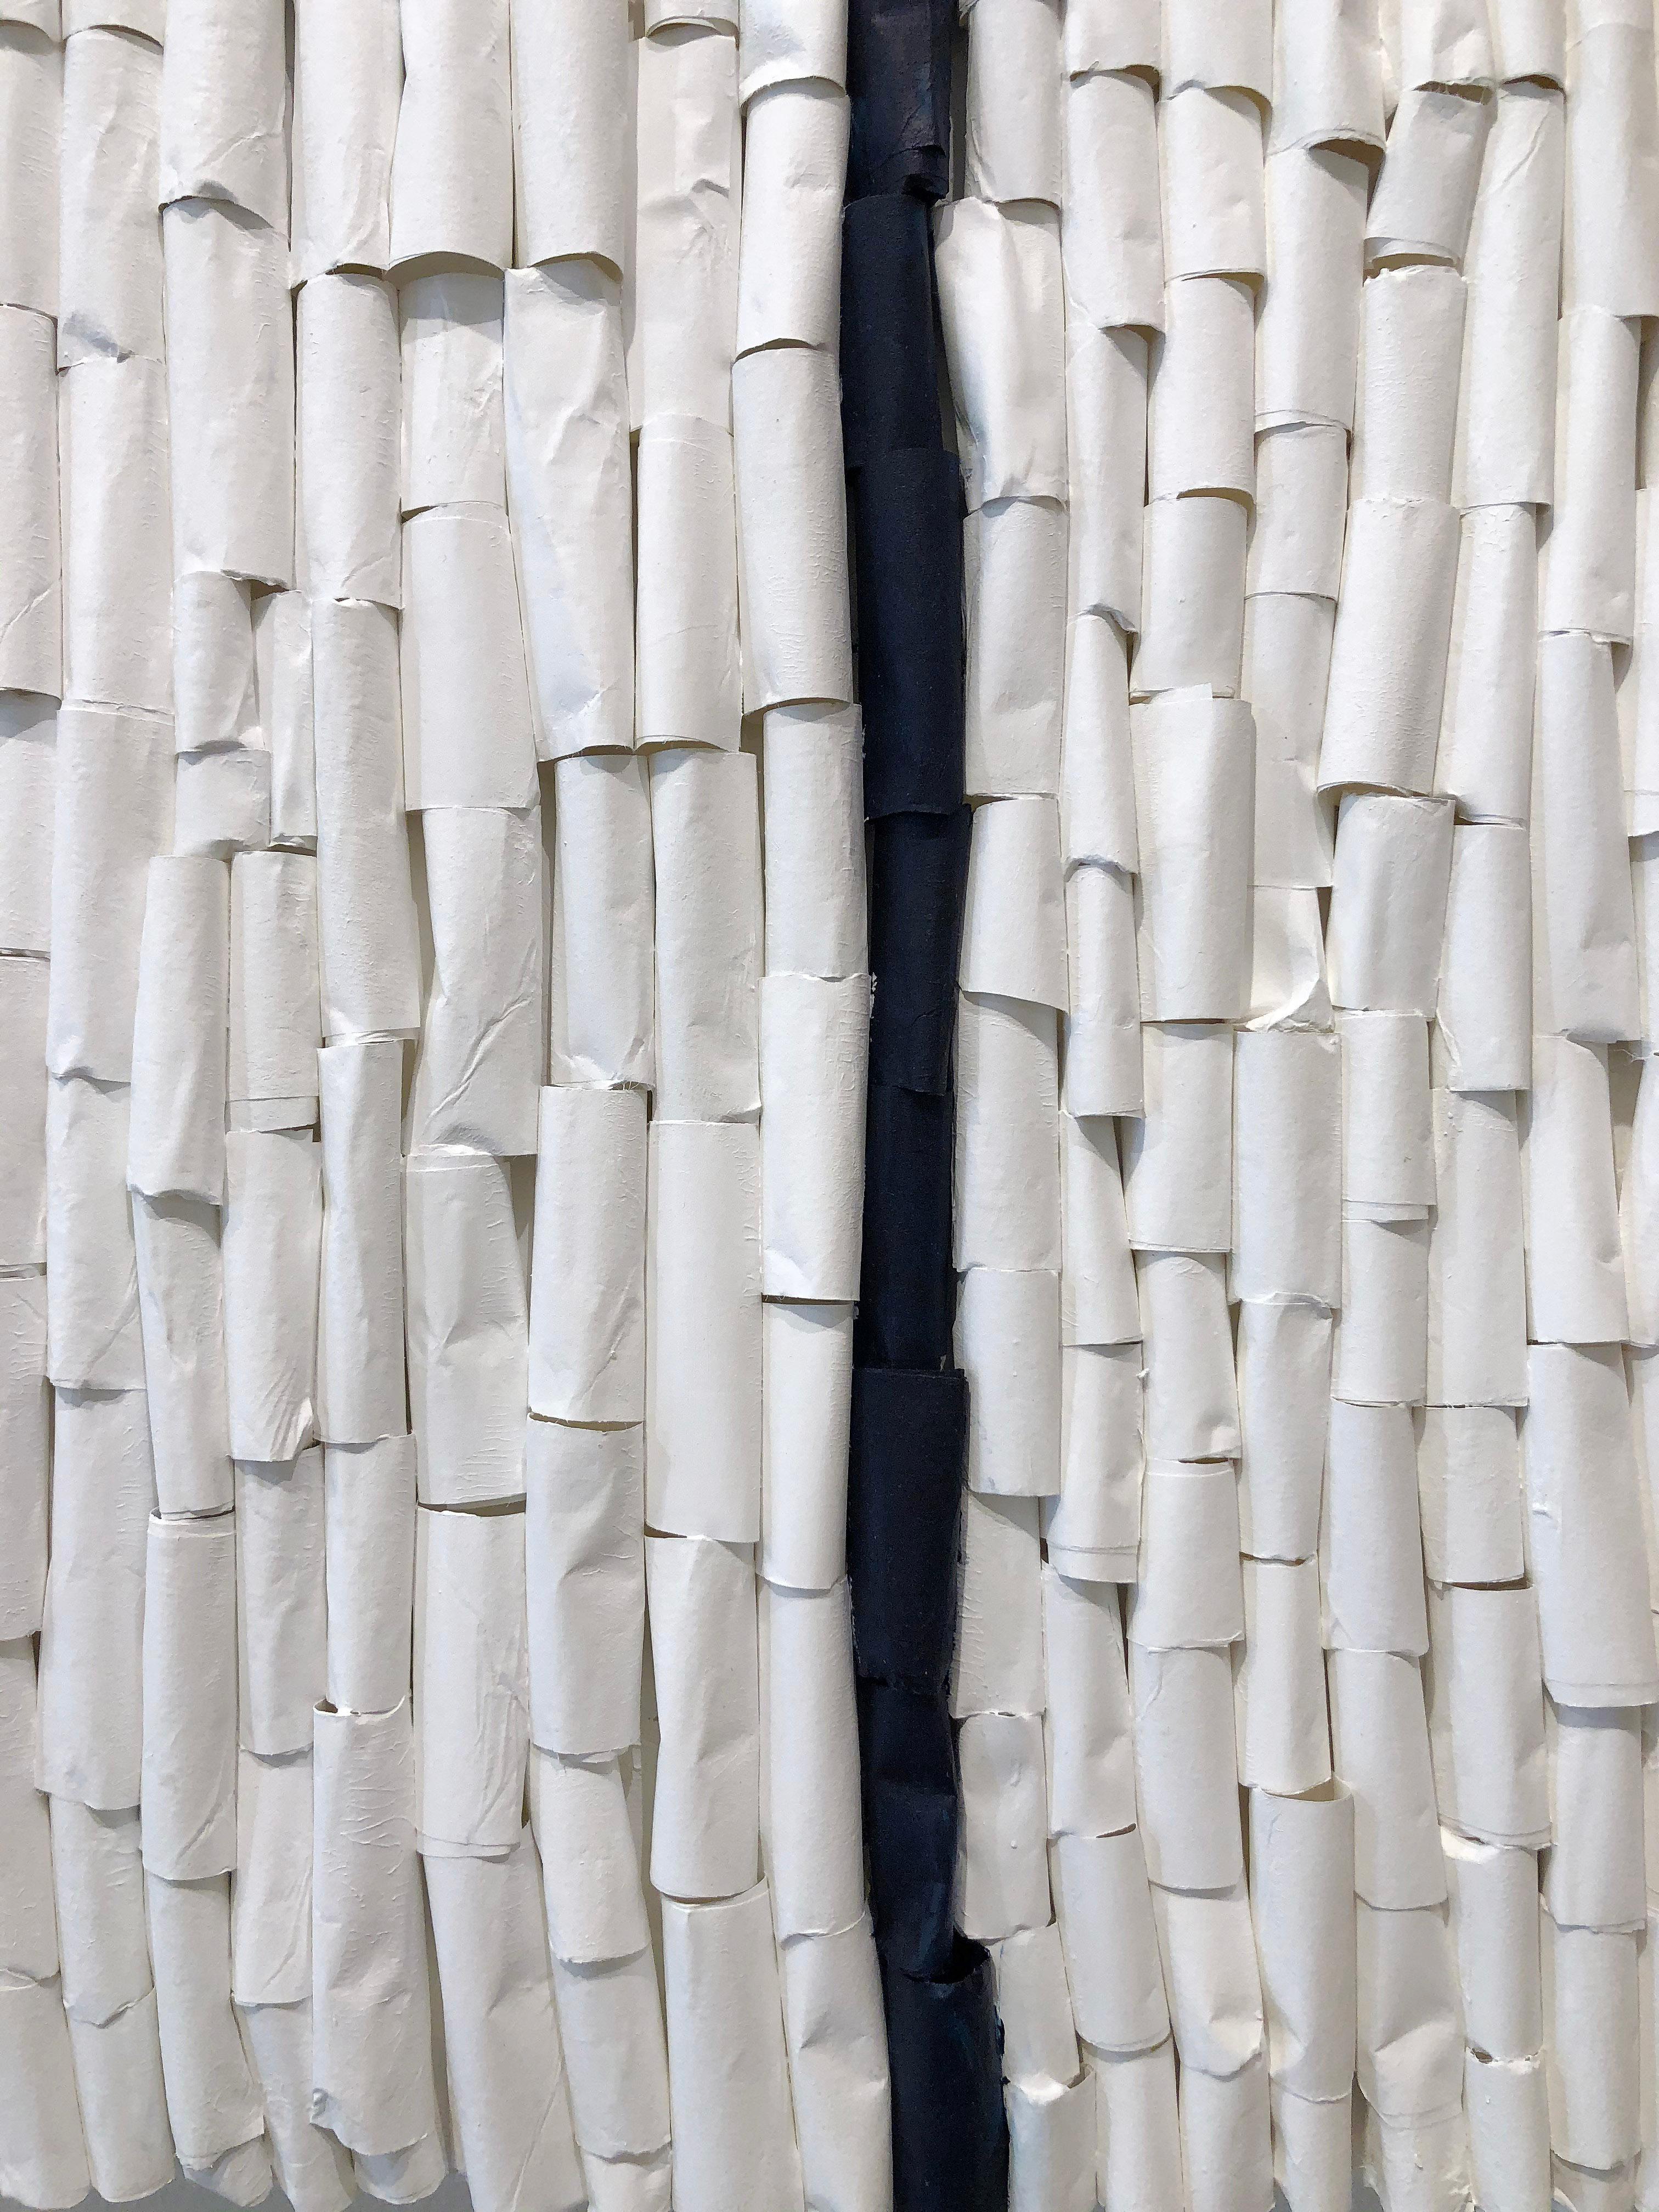 Rice paper & acrylic, Sculptural wall work, Barbara Hirsch, In Parallel 5